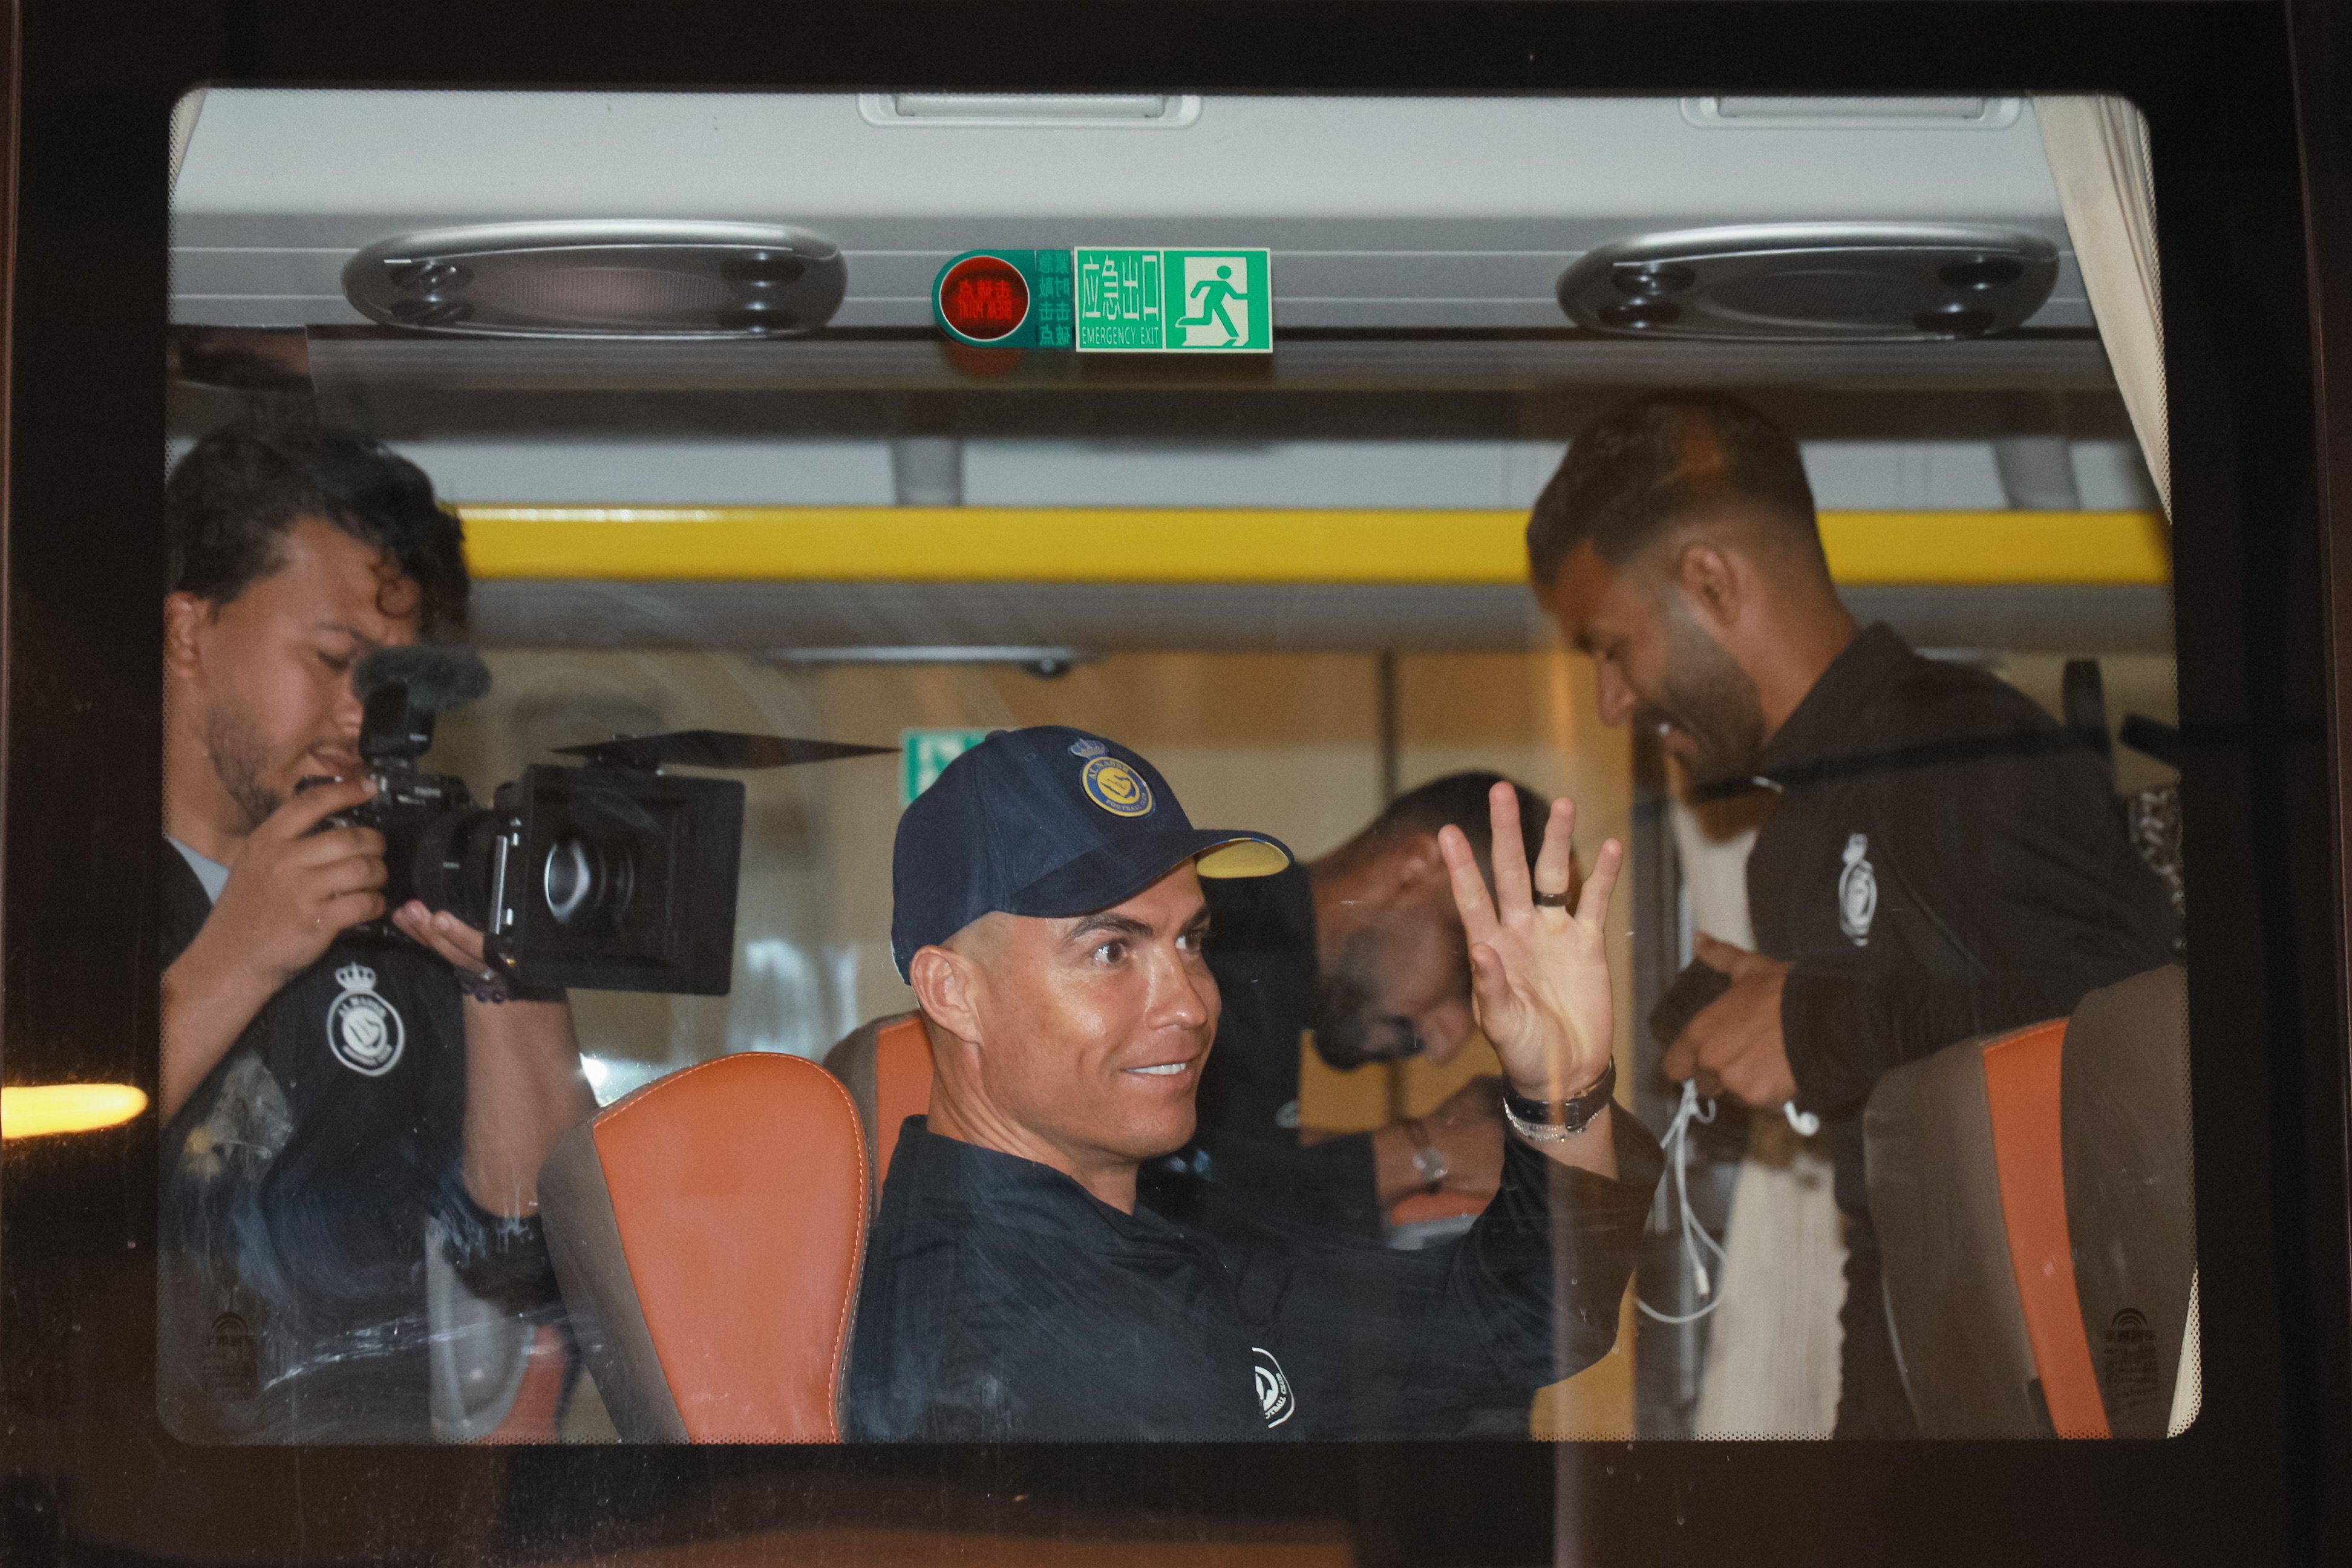 Cristiano Ronaldo waves to fans from a bus on arrival in Shenzhen on Sunday. Photo: EPA-EFE